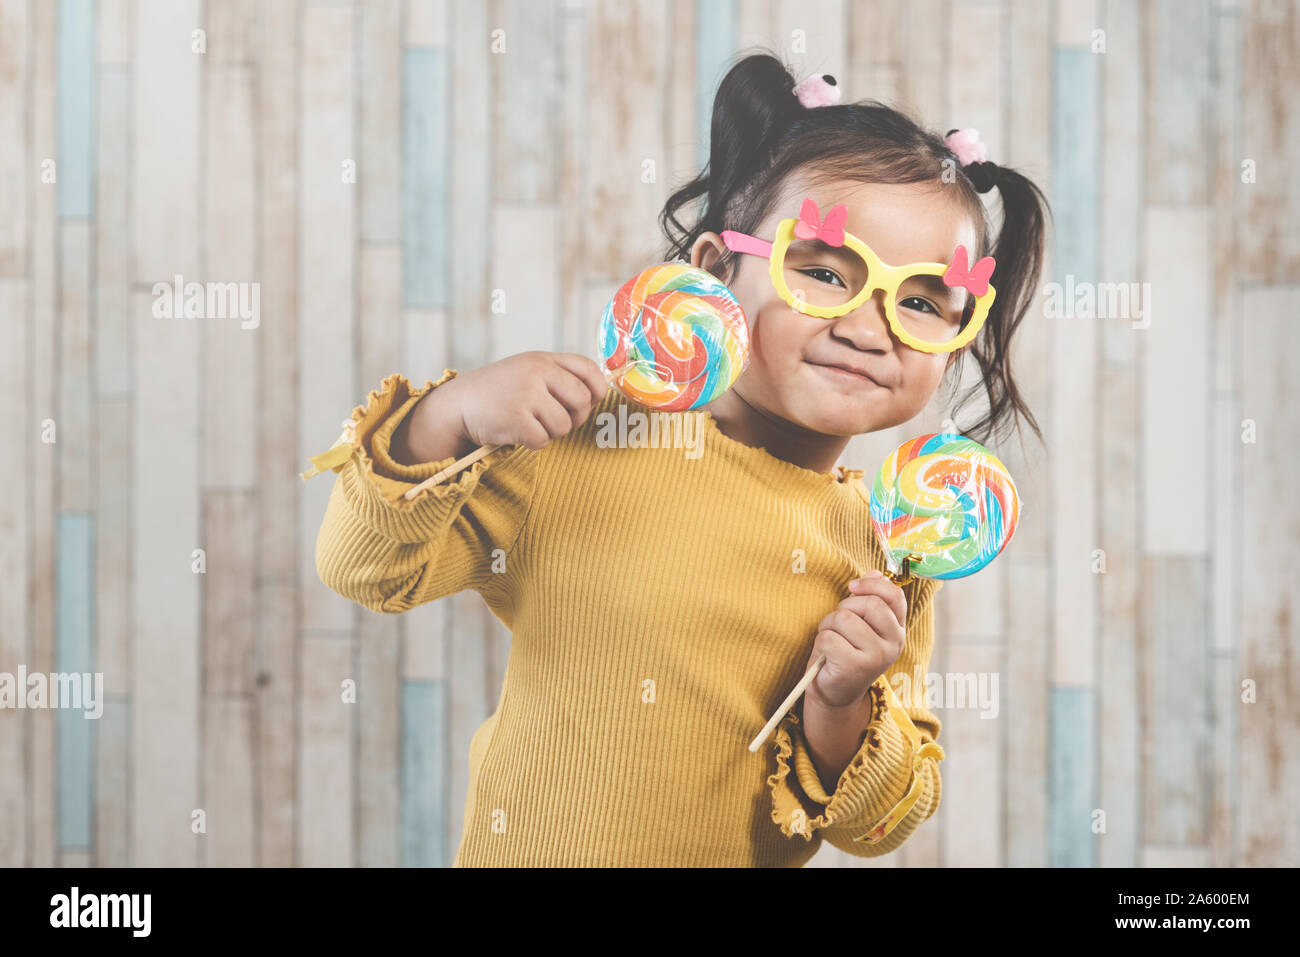 Cute little asian girl holding and eating a colorful lollipop. concept of oral care and candy day Stock Photo